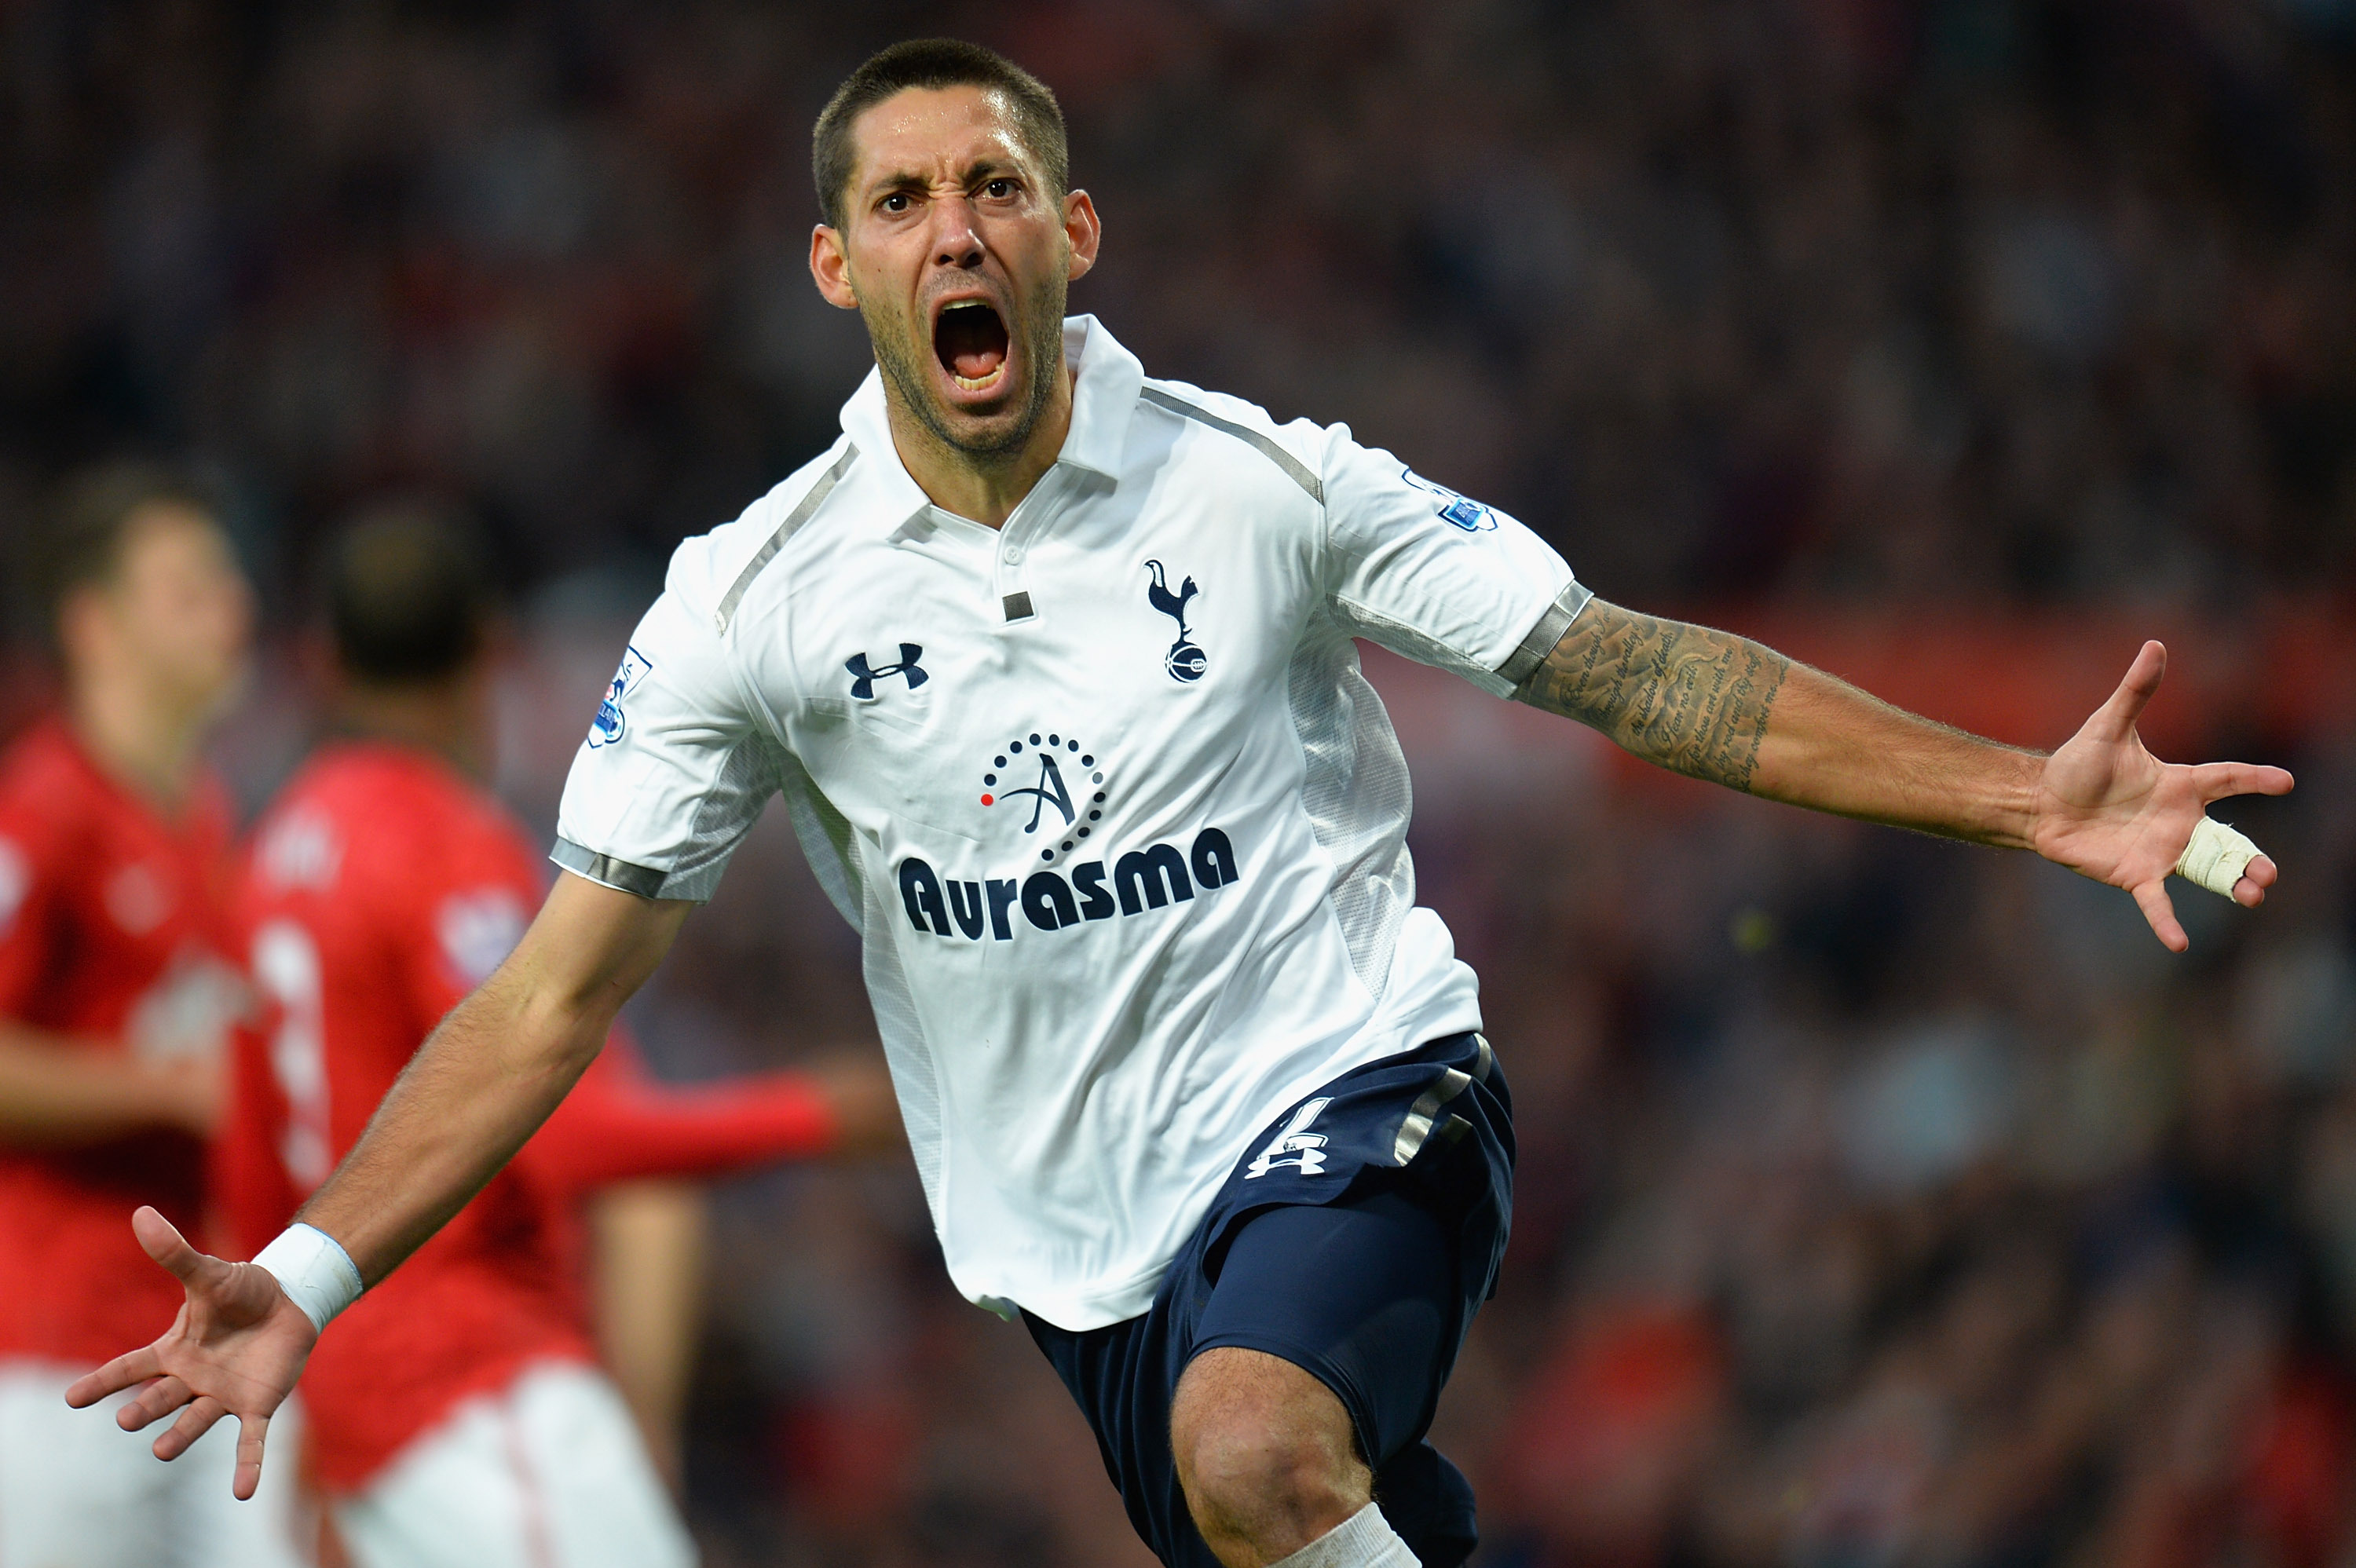 Why Clint Dempsey Would Be a Great Premier League Loan